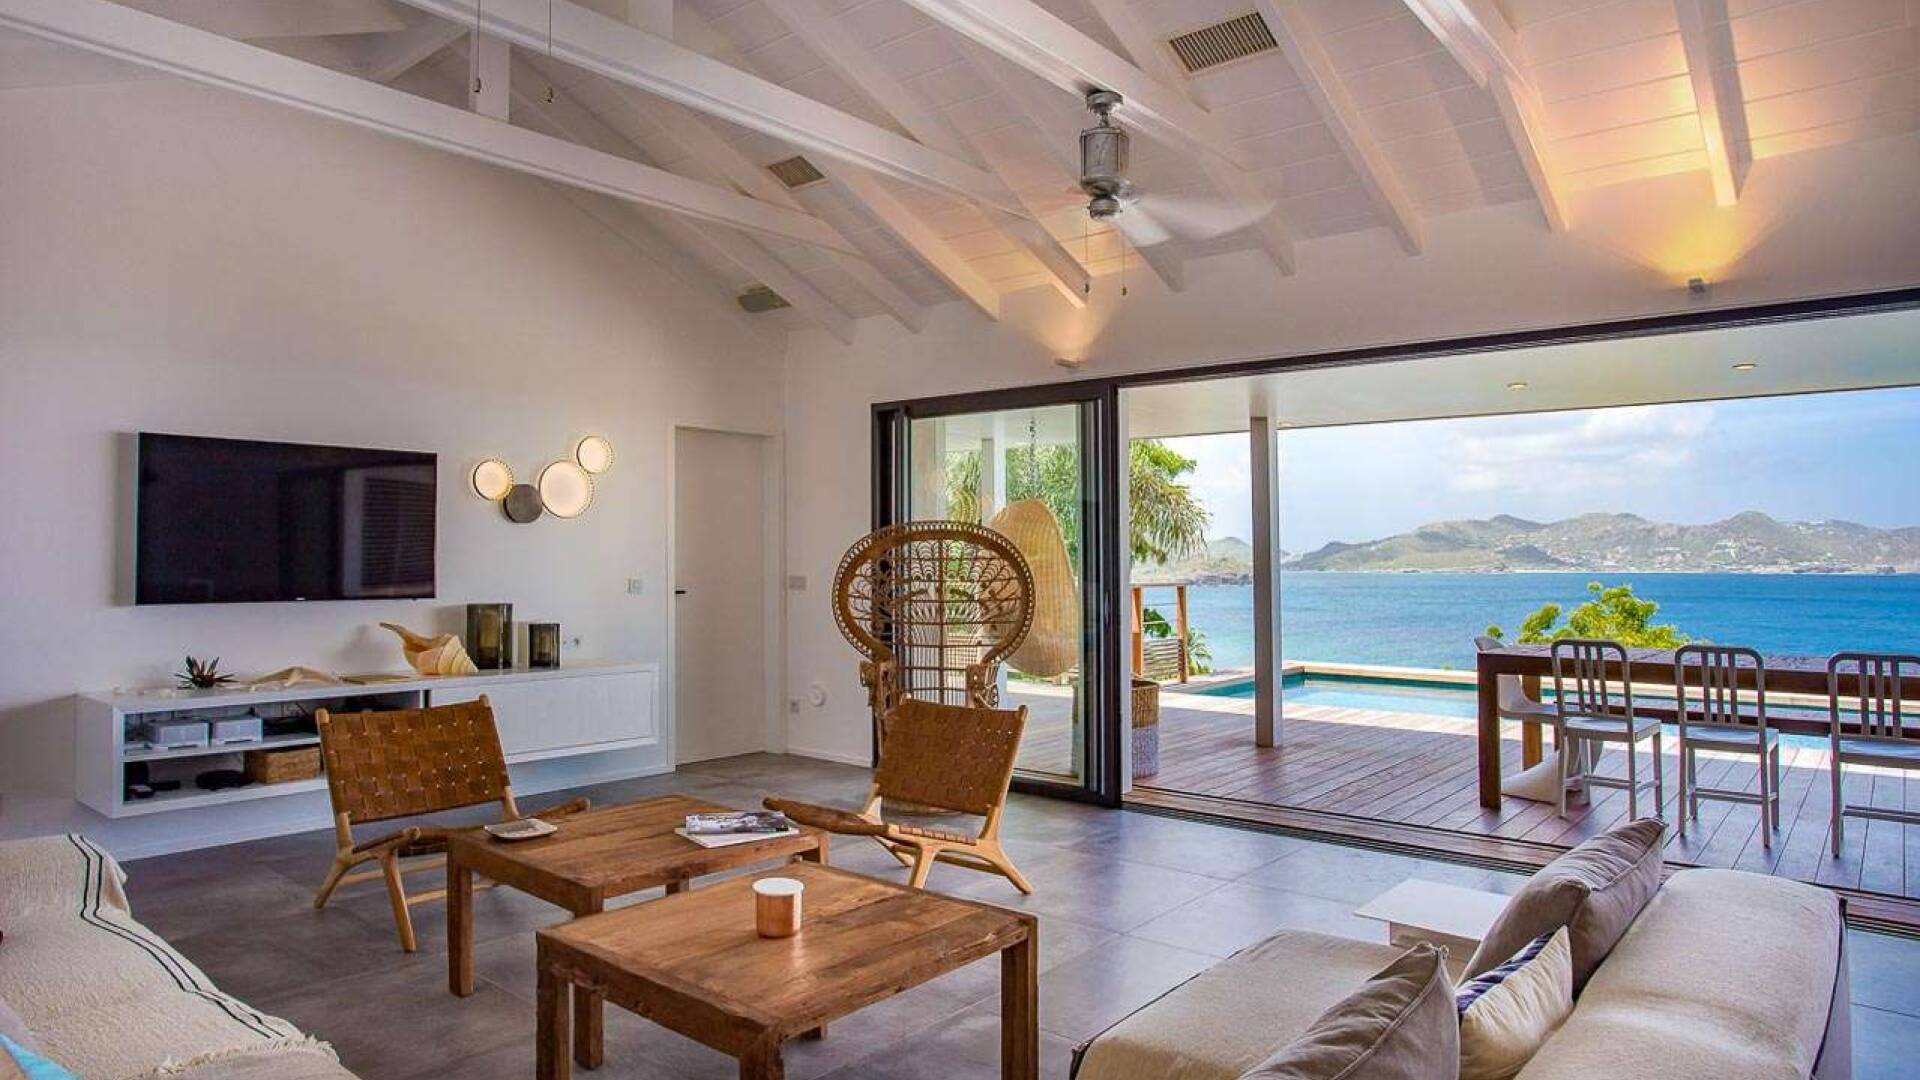 Living Room at WV SUM, Pointe Milou, St. Barthelemy